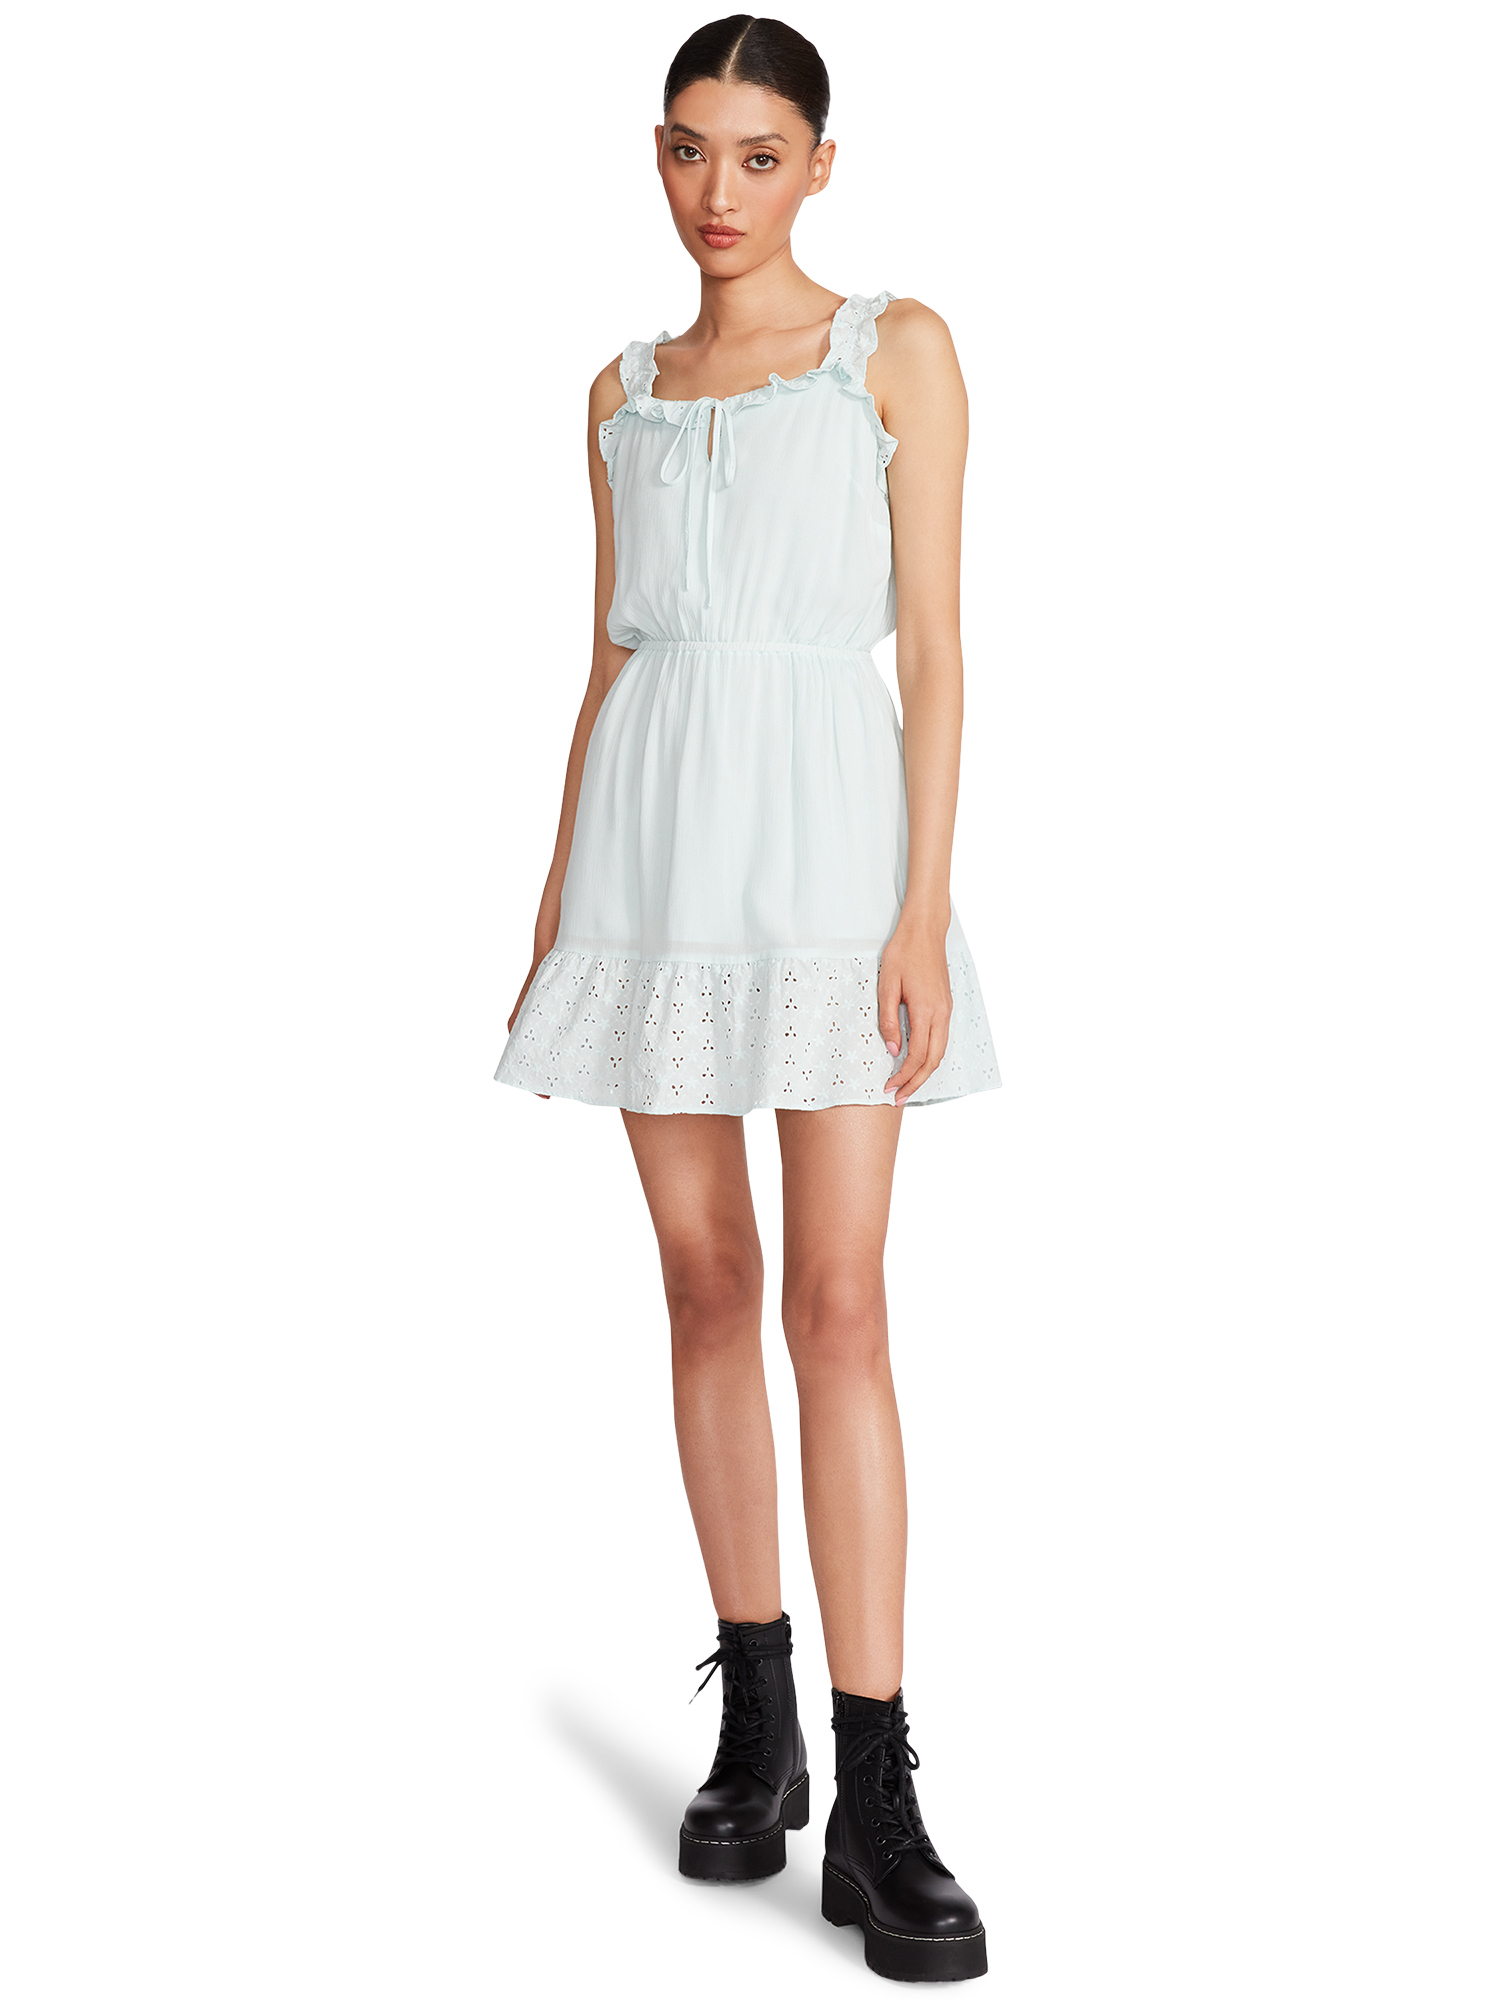 A model poses in a sleeveless mini dress with eyelet hem detail, paired with black boots